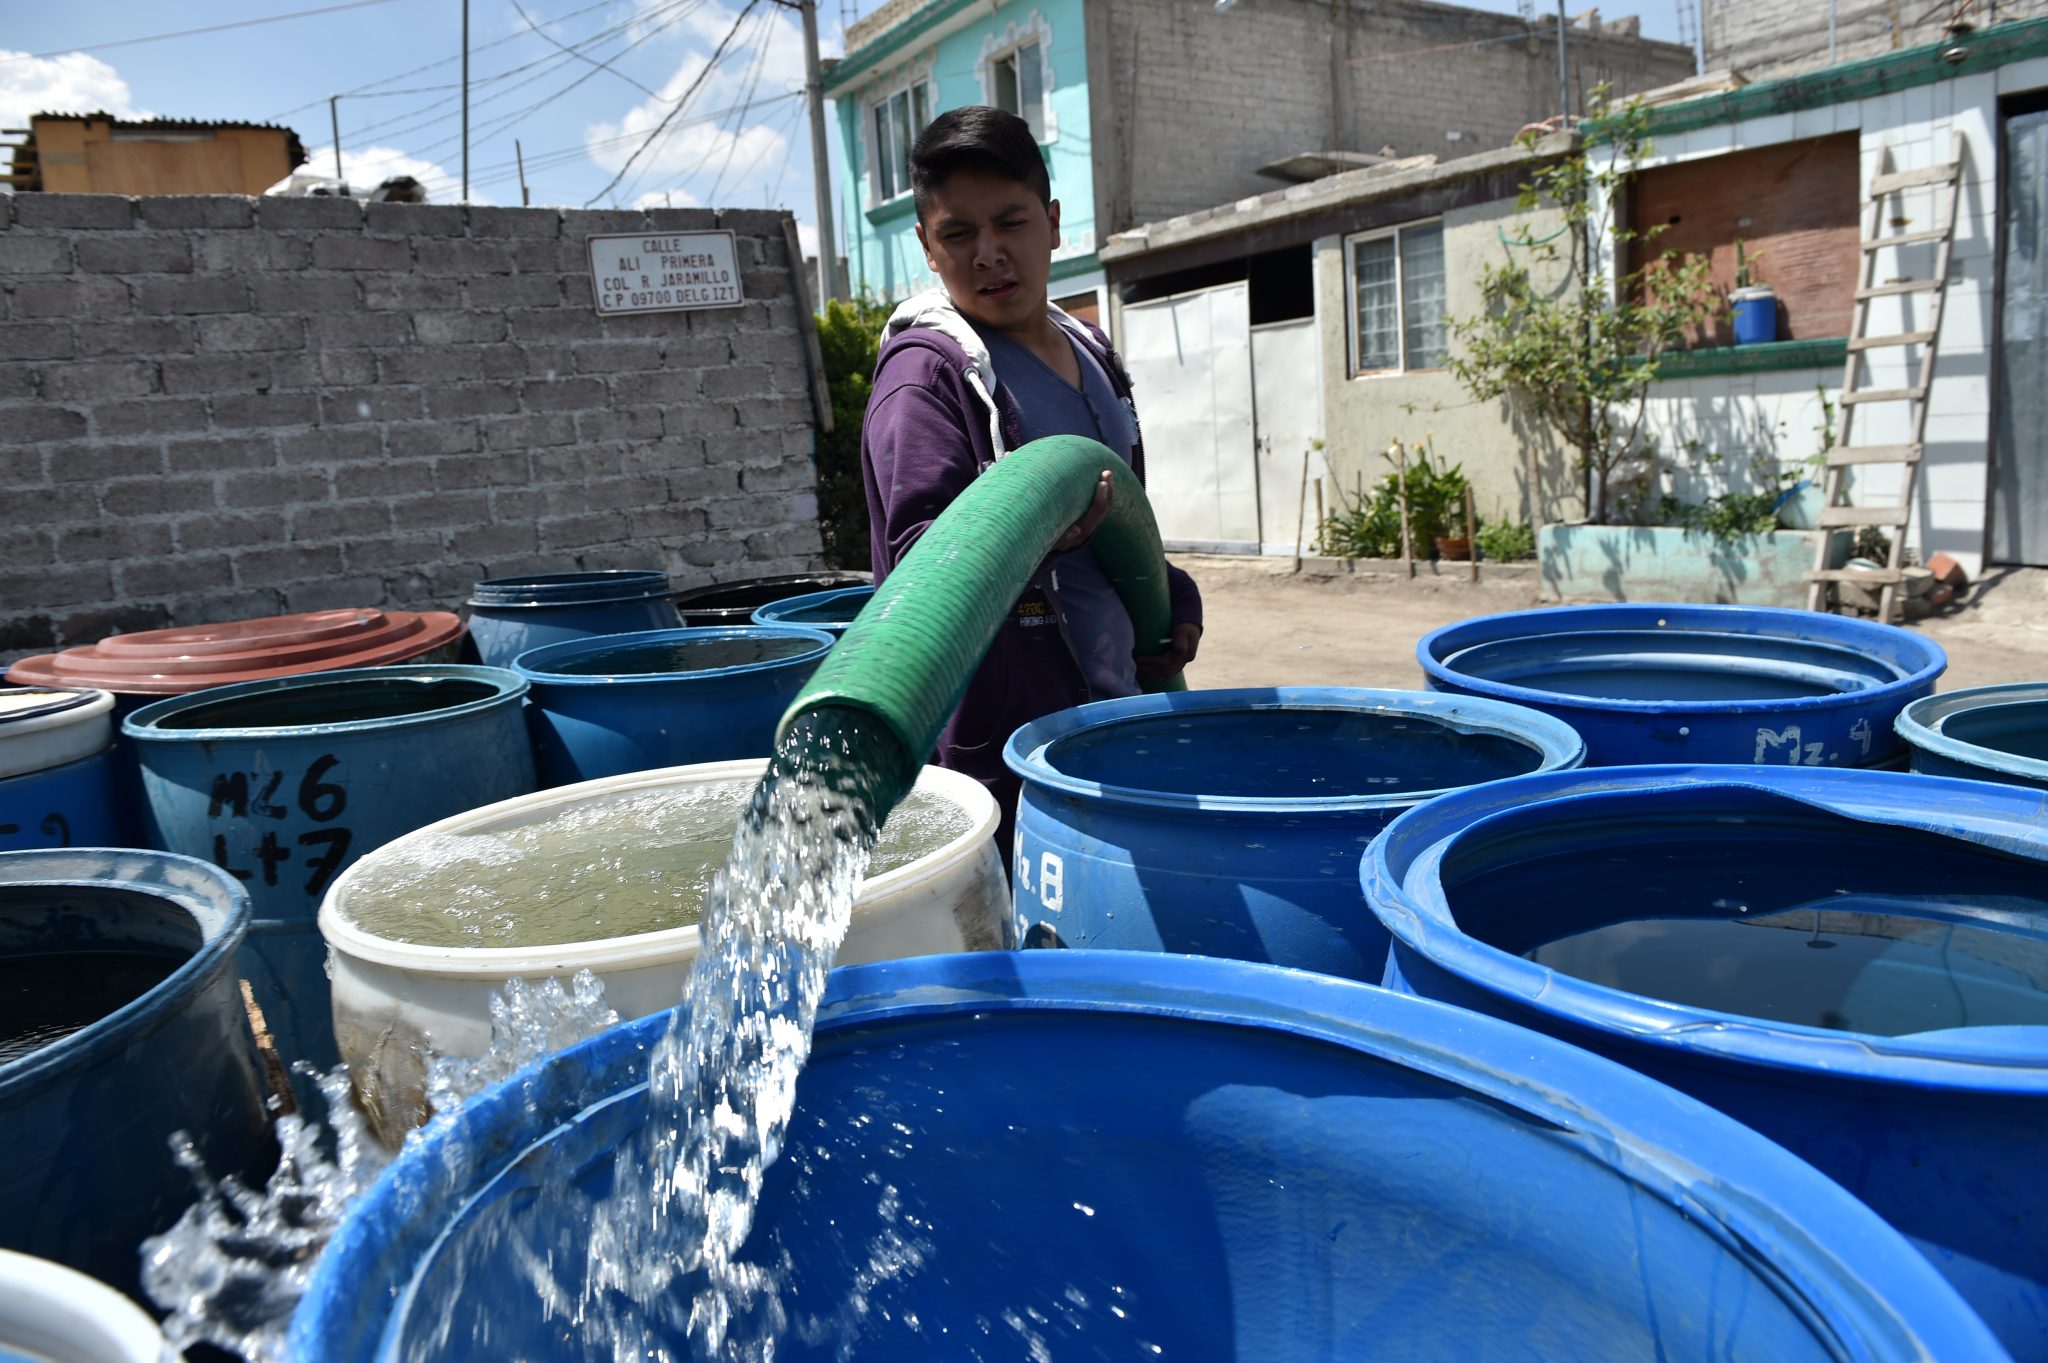 A municipal employee fills barrels of water from a tanker truck in a neighborhood in the Mexico City borough of Iztapalapa on April 19, 2017. Dozens of municipal tanker trucks in Mexico City distribute water in neighborhoods that do not receive piped water. In Iztapalapa approximately two million people have no running water and have to fill barrels and carry it to their homes in buckets. / AFP PHOTO / YURI CORTEZ / TO GO WITH AFP STORY BY YUSSEL GONZALEZ